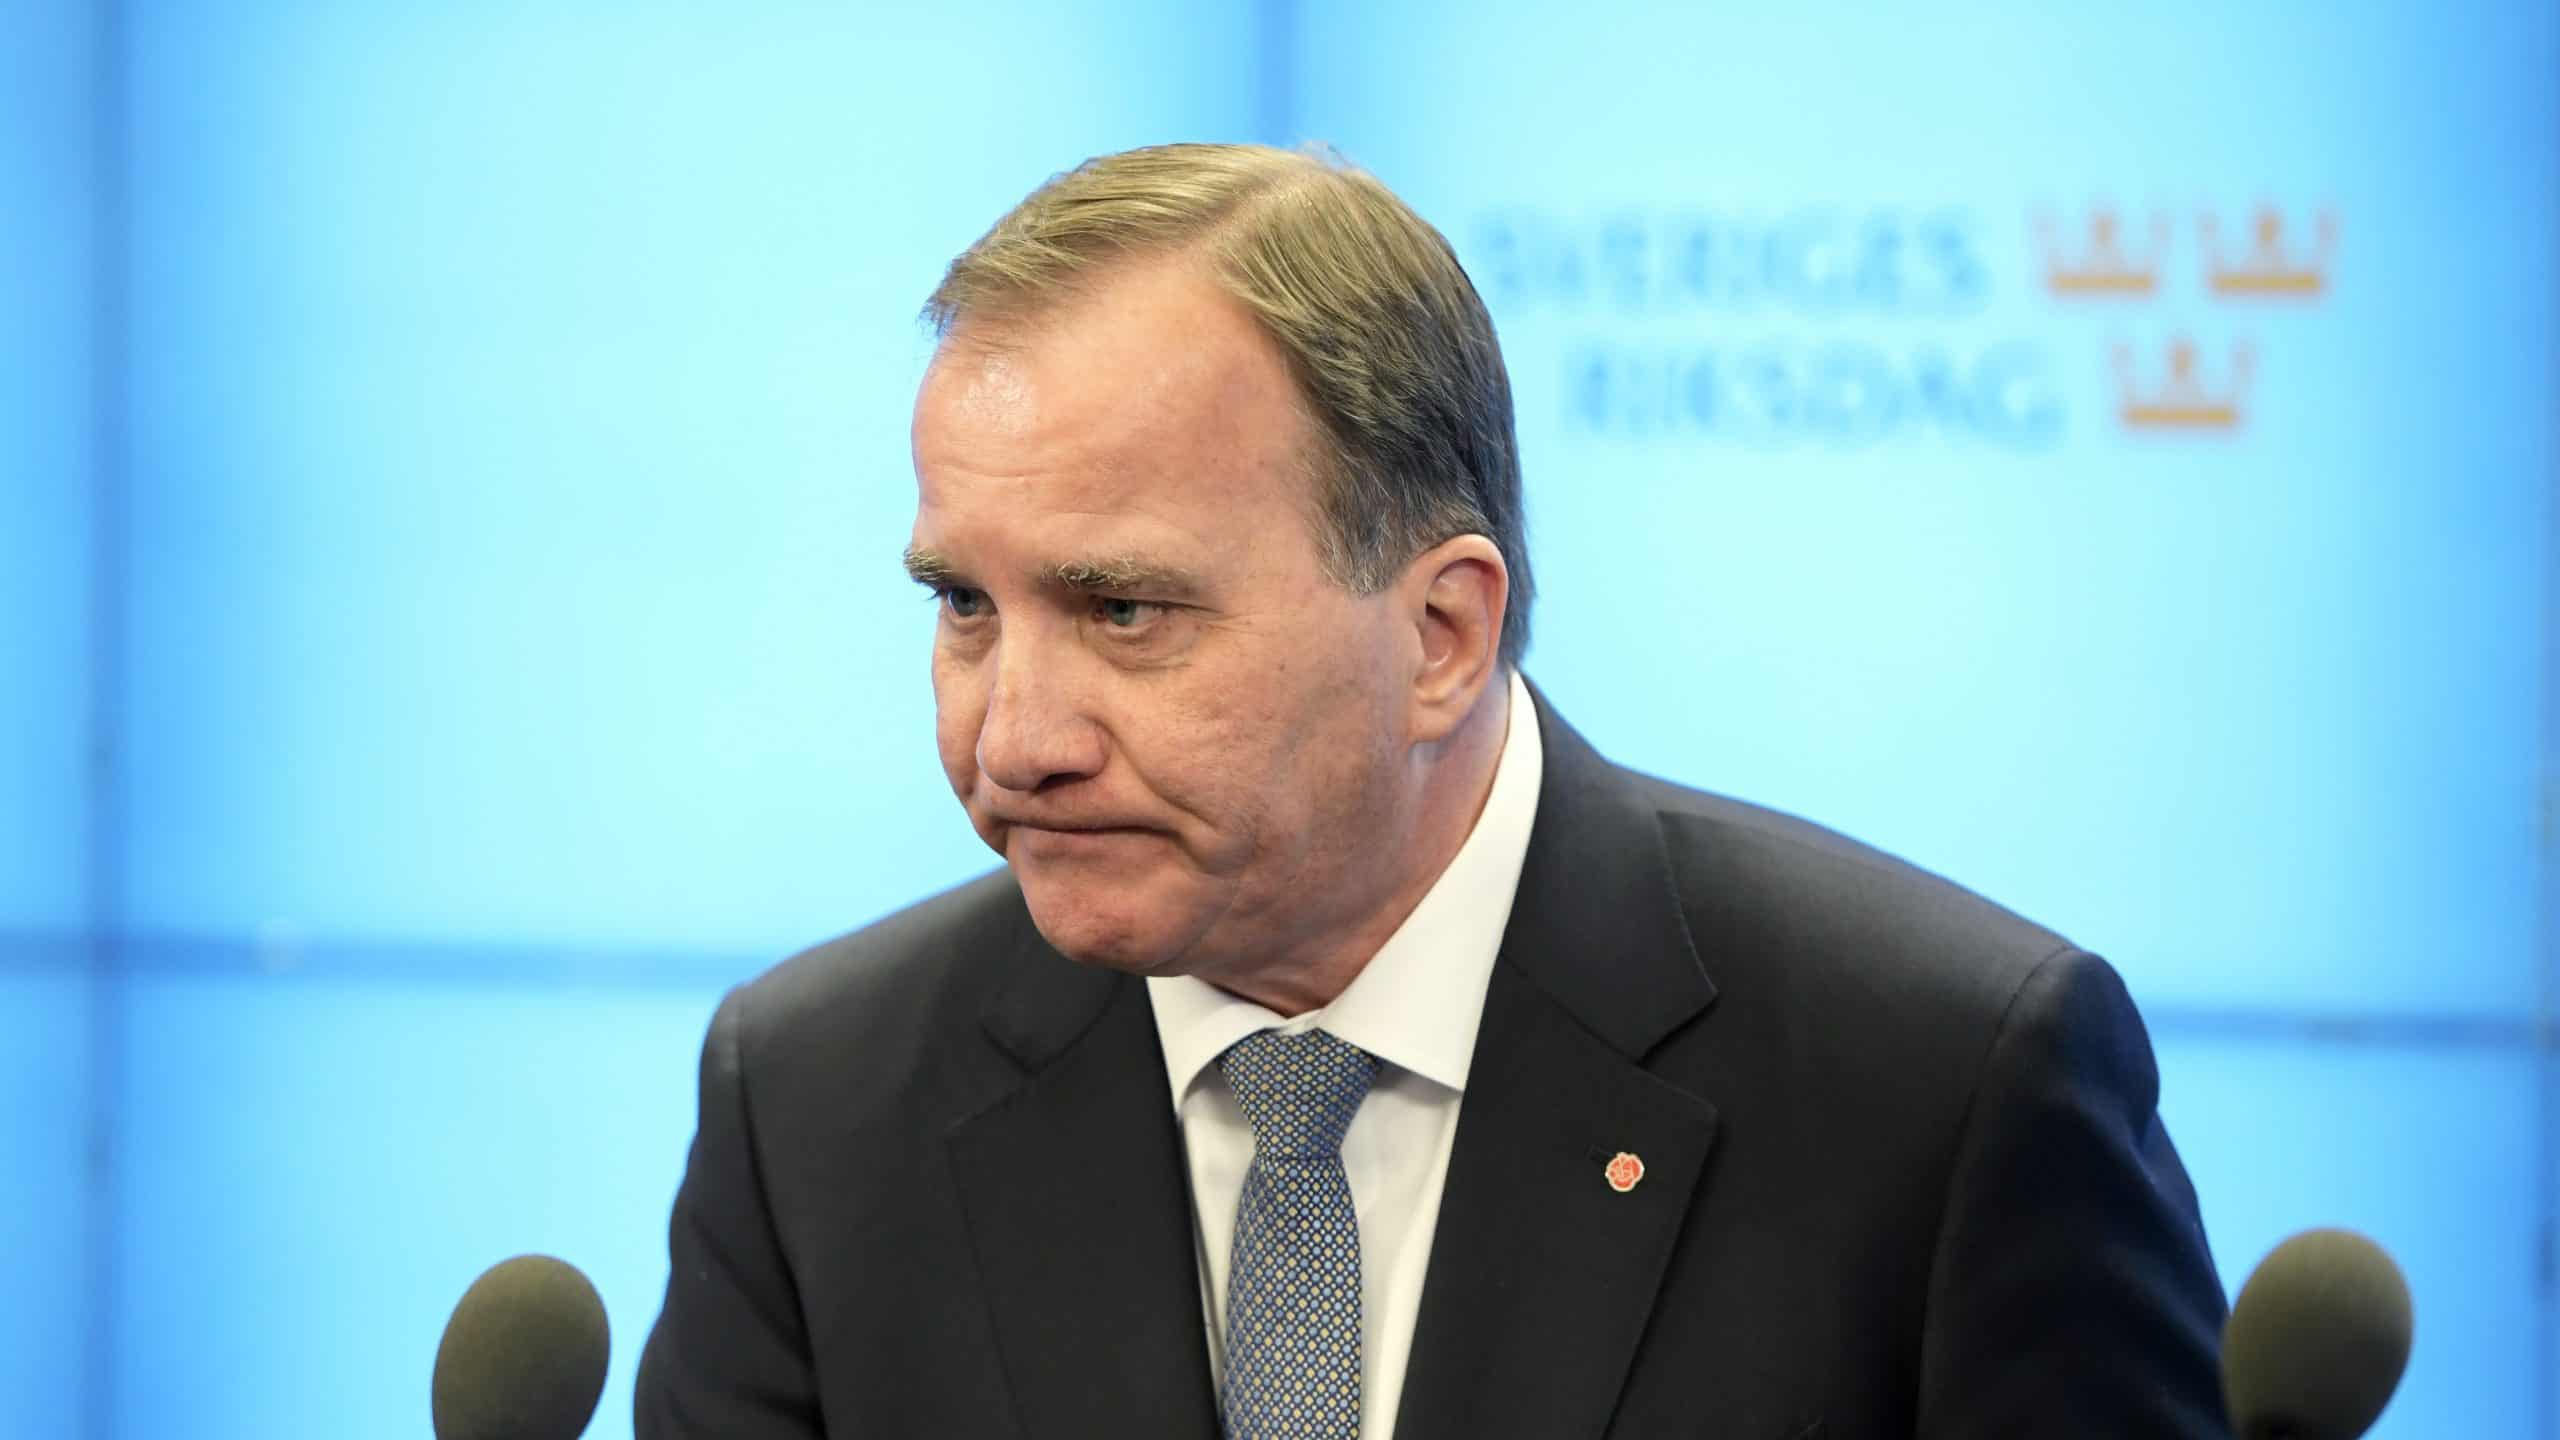 Swedish PM calls for shift in approach and orders inquiry into handling of virus